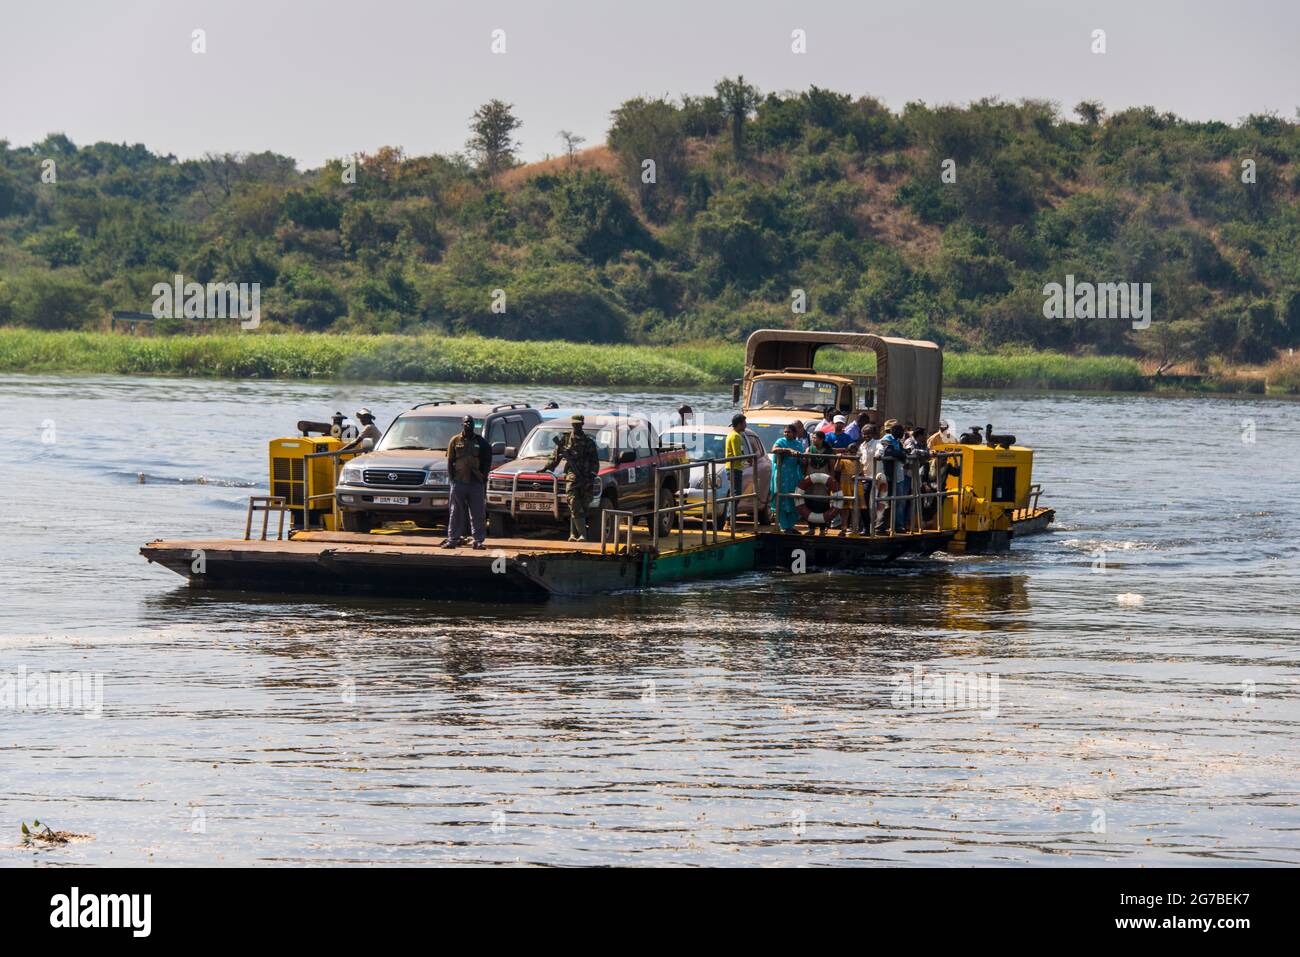 Ferry over the Nile in the Murchison Falls National Park, Uganda, Africa Stock Photo